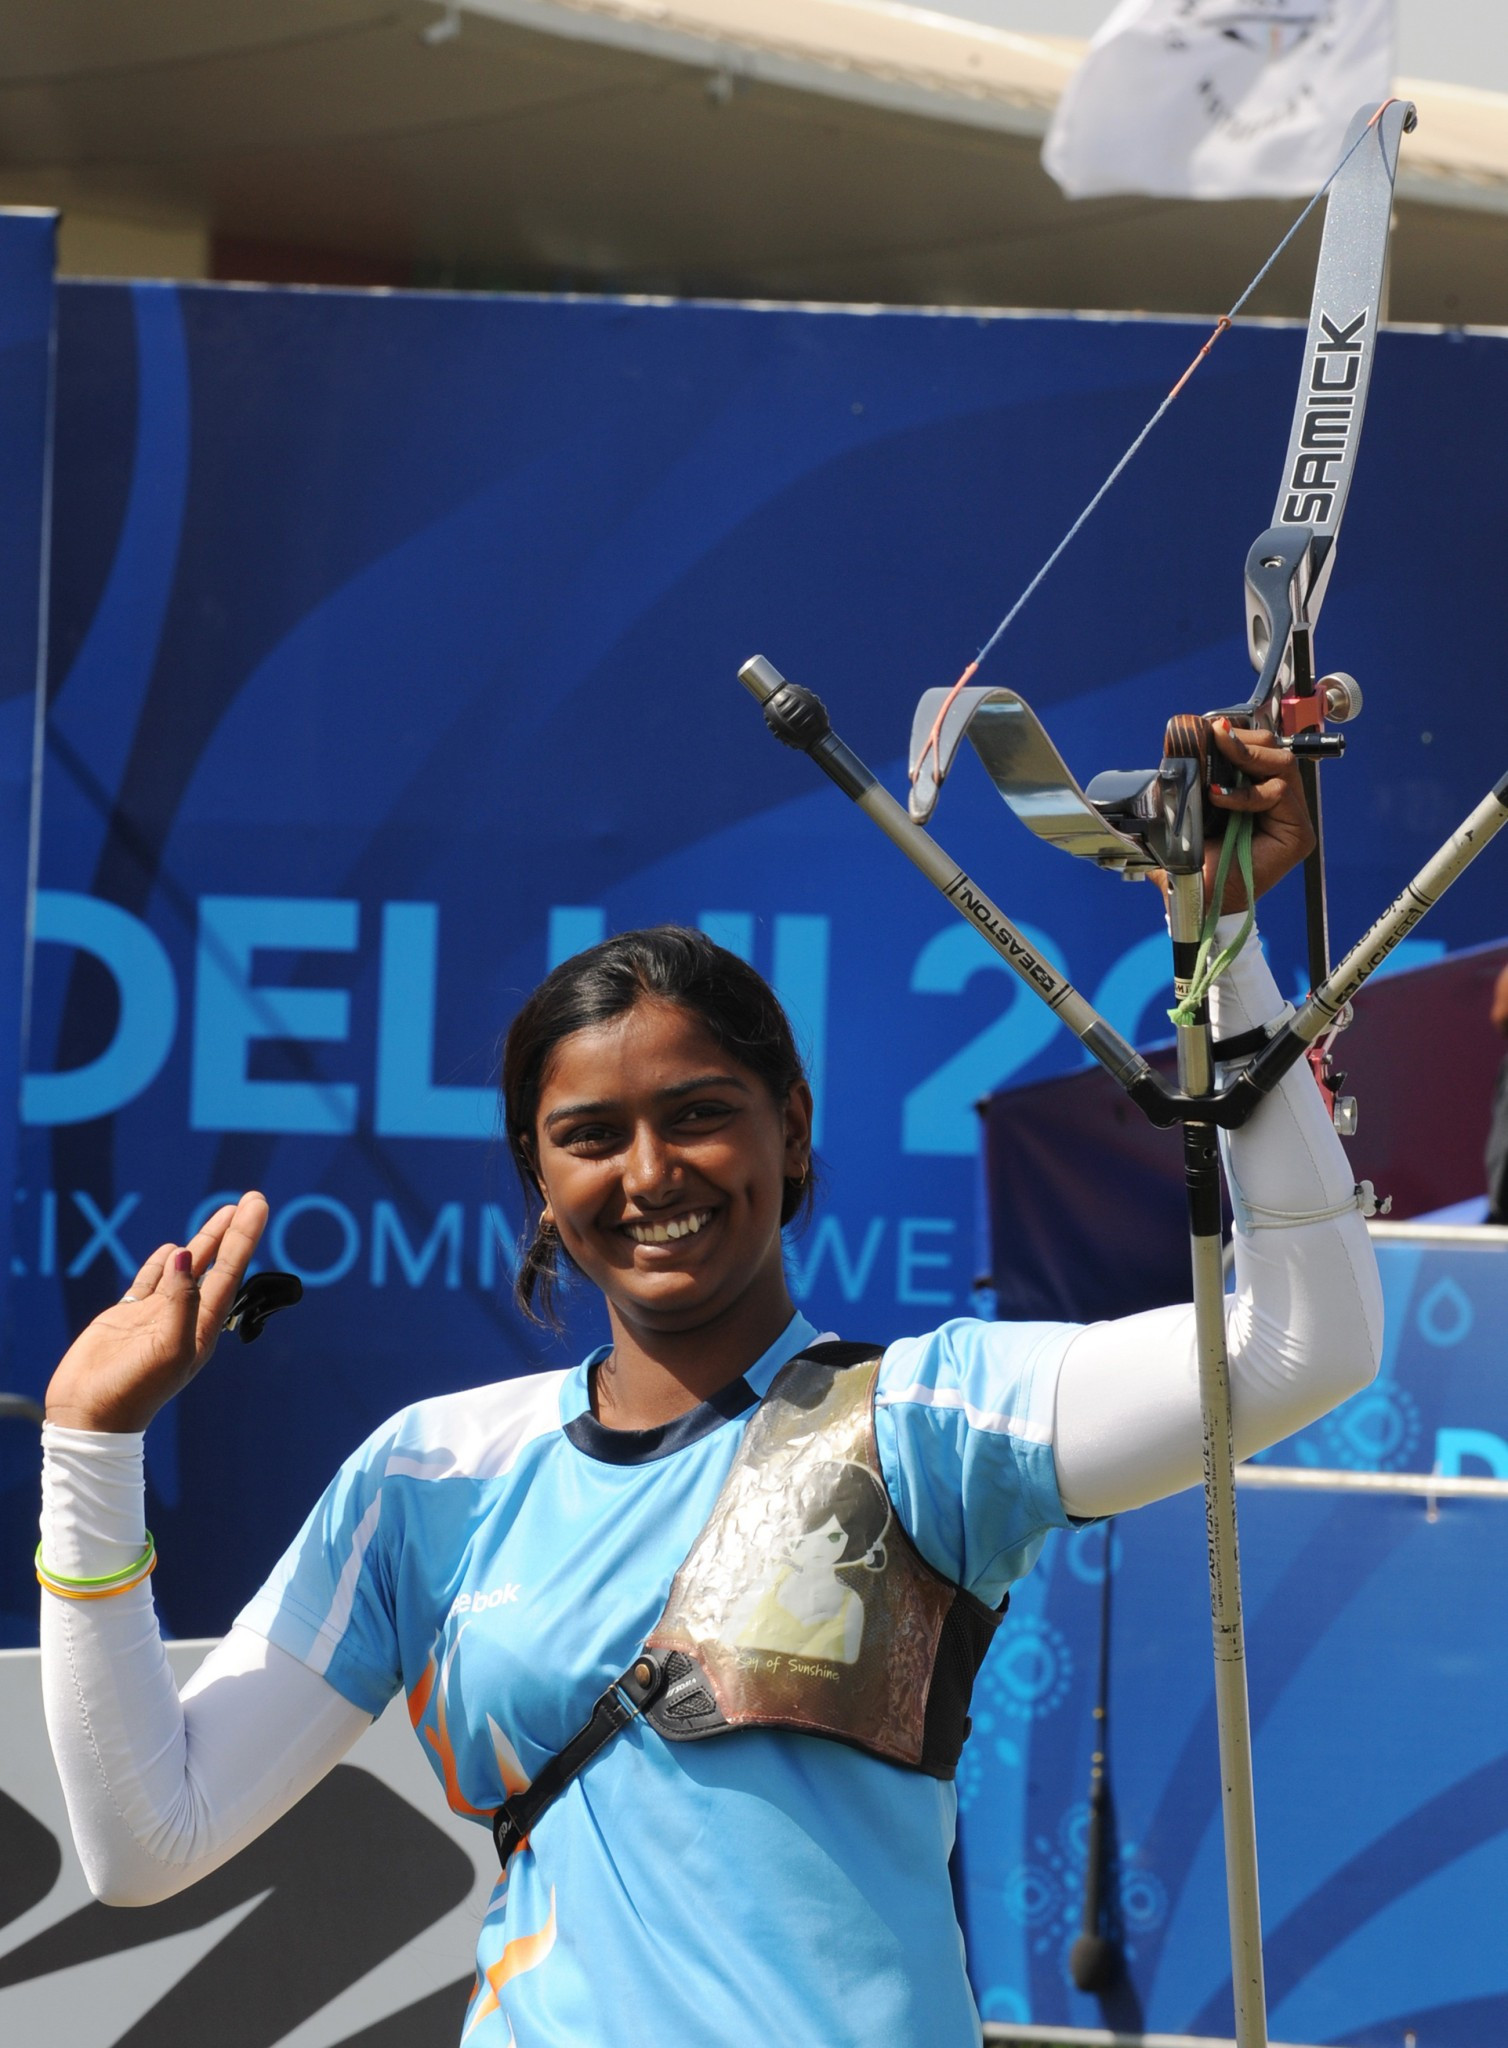 Archery has been held twice at the Commonwealth Games, at Brisbane in 1982 New Delhi in 2010 ©Getty Images